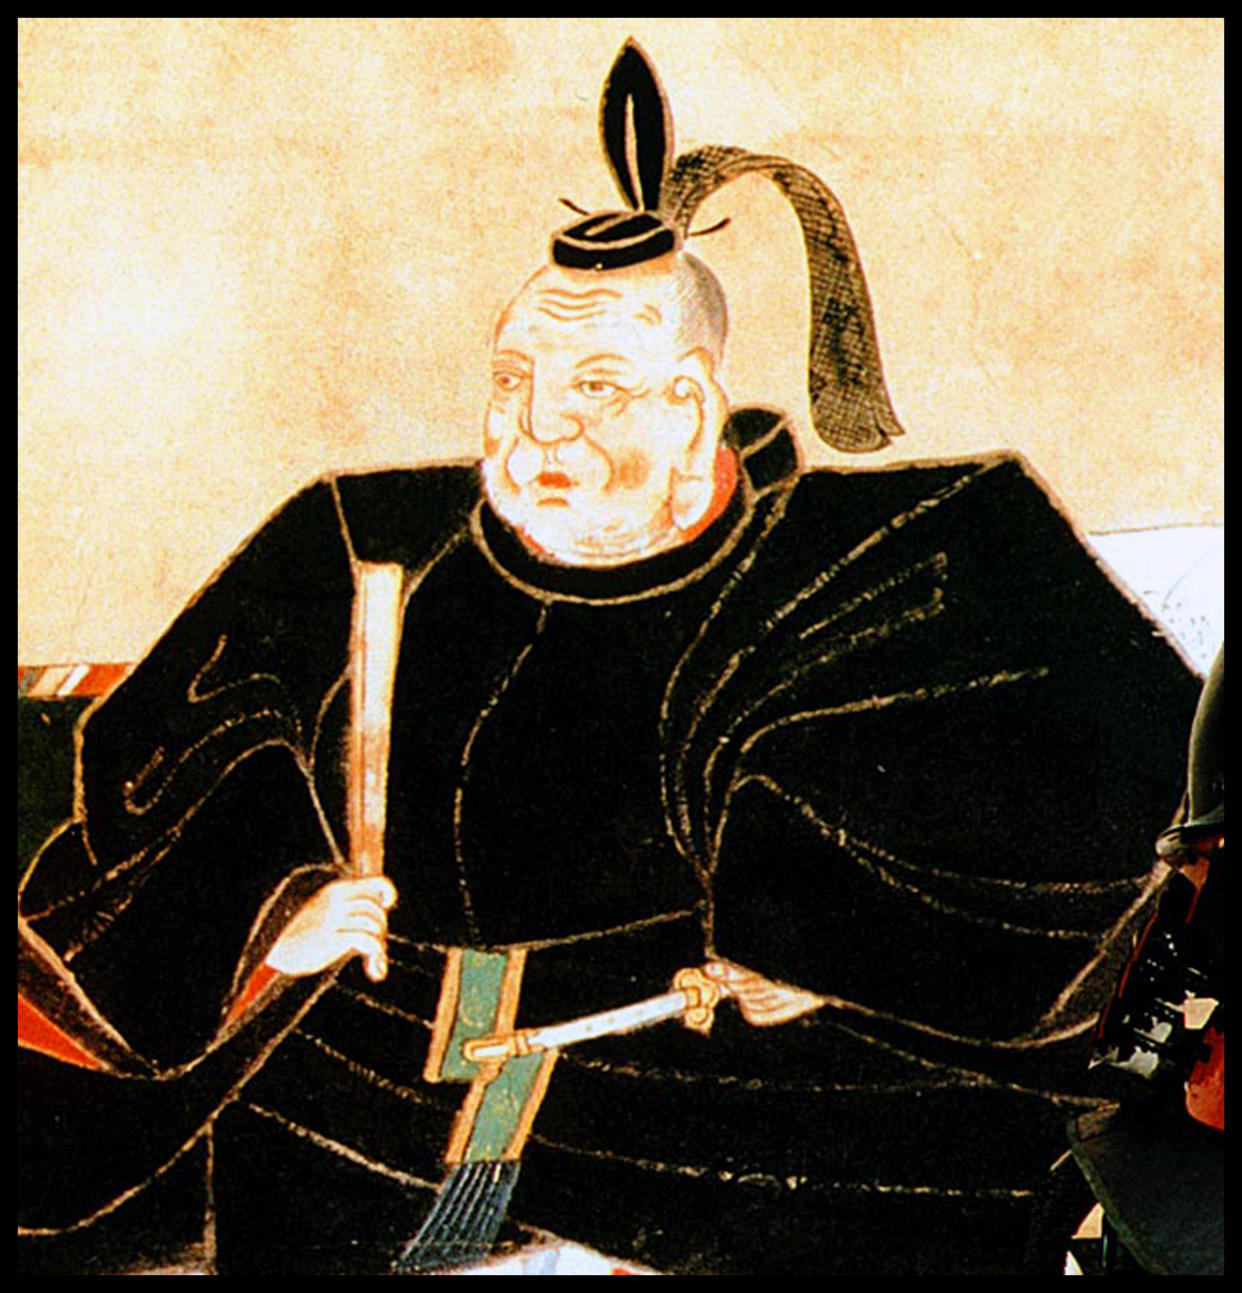 Tokugawa Ieyasu (January 31, 1543 Ð June 1, 1616) was the founder and first shogun of the Tokugawa shogunate of Japan , which ruled from the Battle of Sekigahara in 1600 until the Meiji Restoration in 1868. Ieyasu seized power in 1600, received appointment as shogun in 1603, abdicated from office in 1605, but remained in power until his death in 1616. Ieyasu was posthumously enshrined at Nikk_ T_sh_-g_ with the name T_sh_ Daigongen. (Photo by: Pictures From History/Universal Images Group via Getty Images)